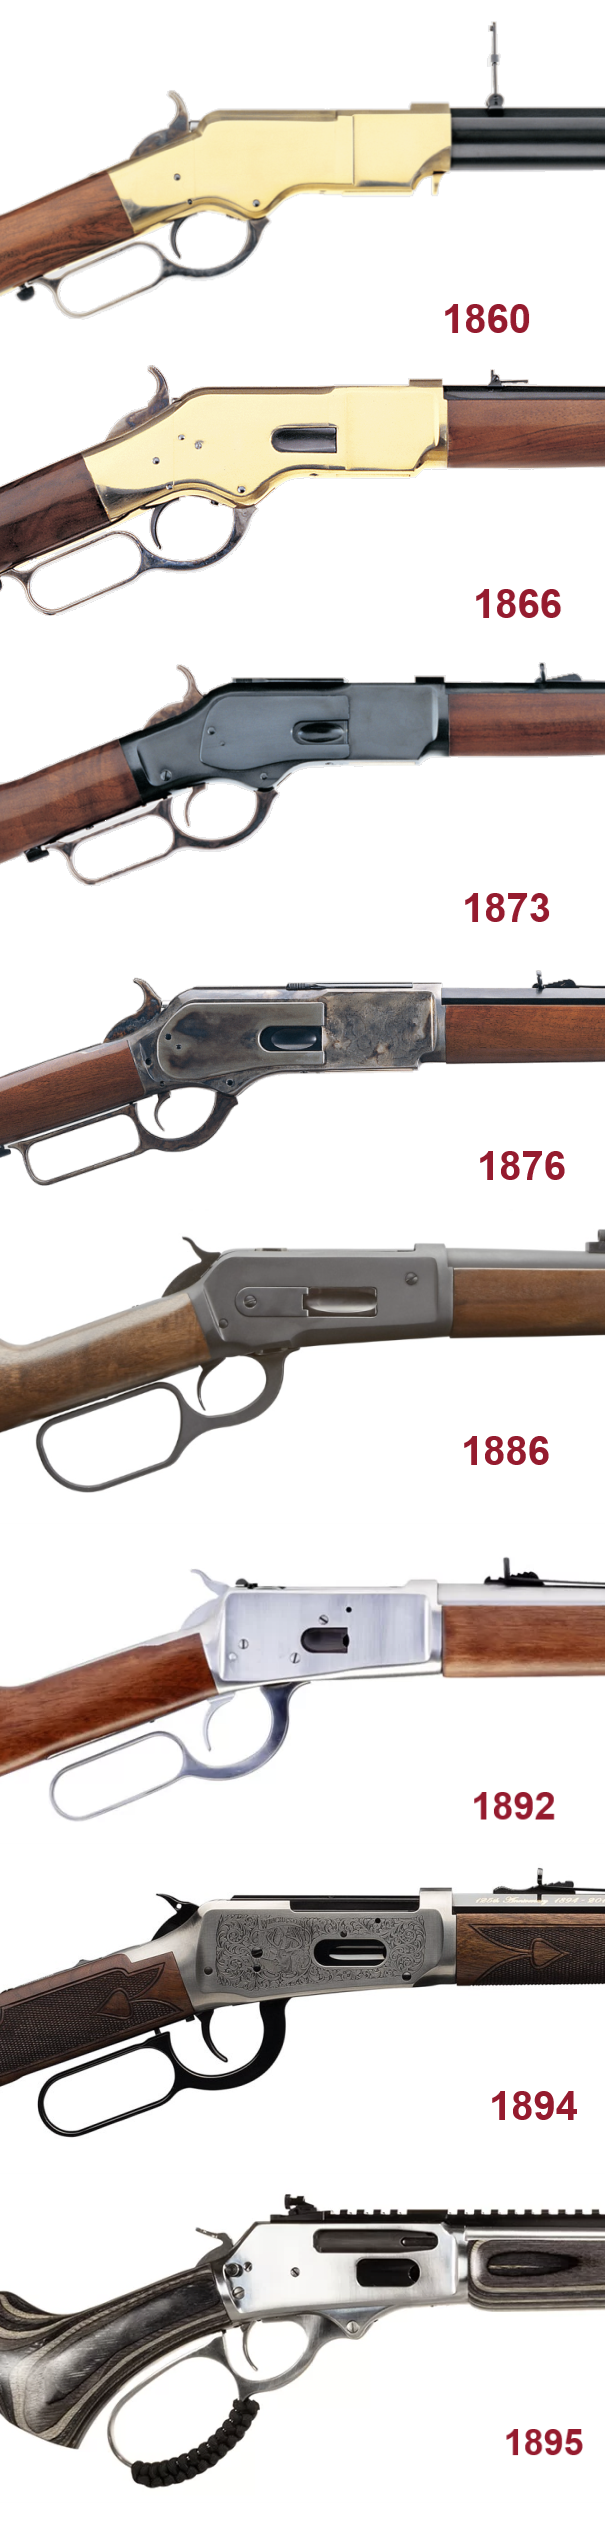 winchester lever action pattern guns